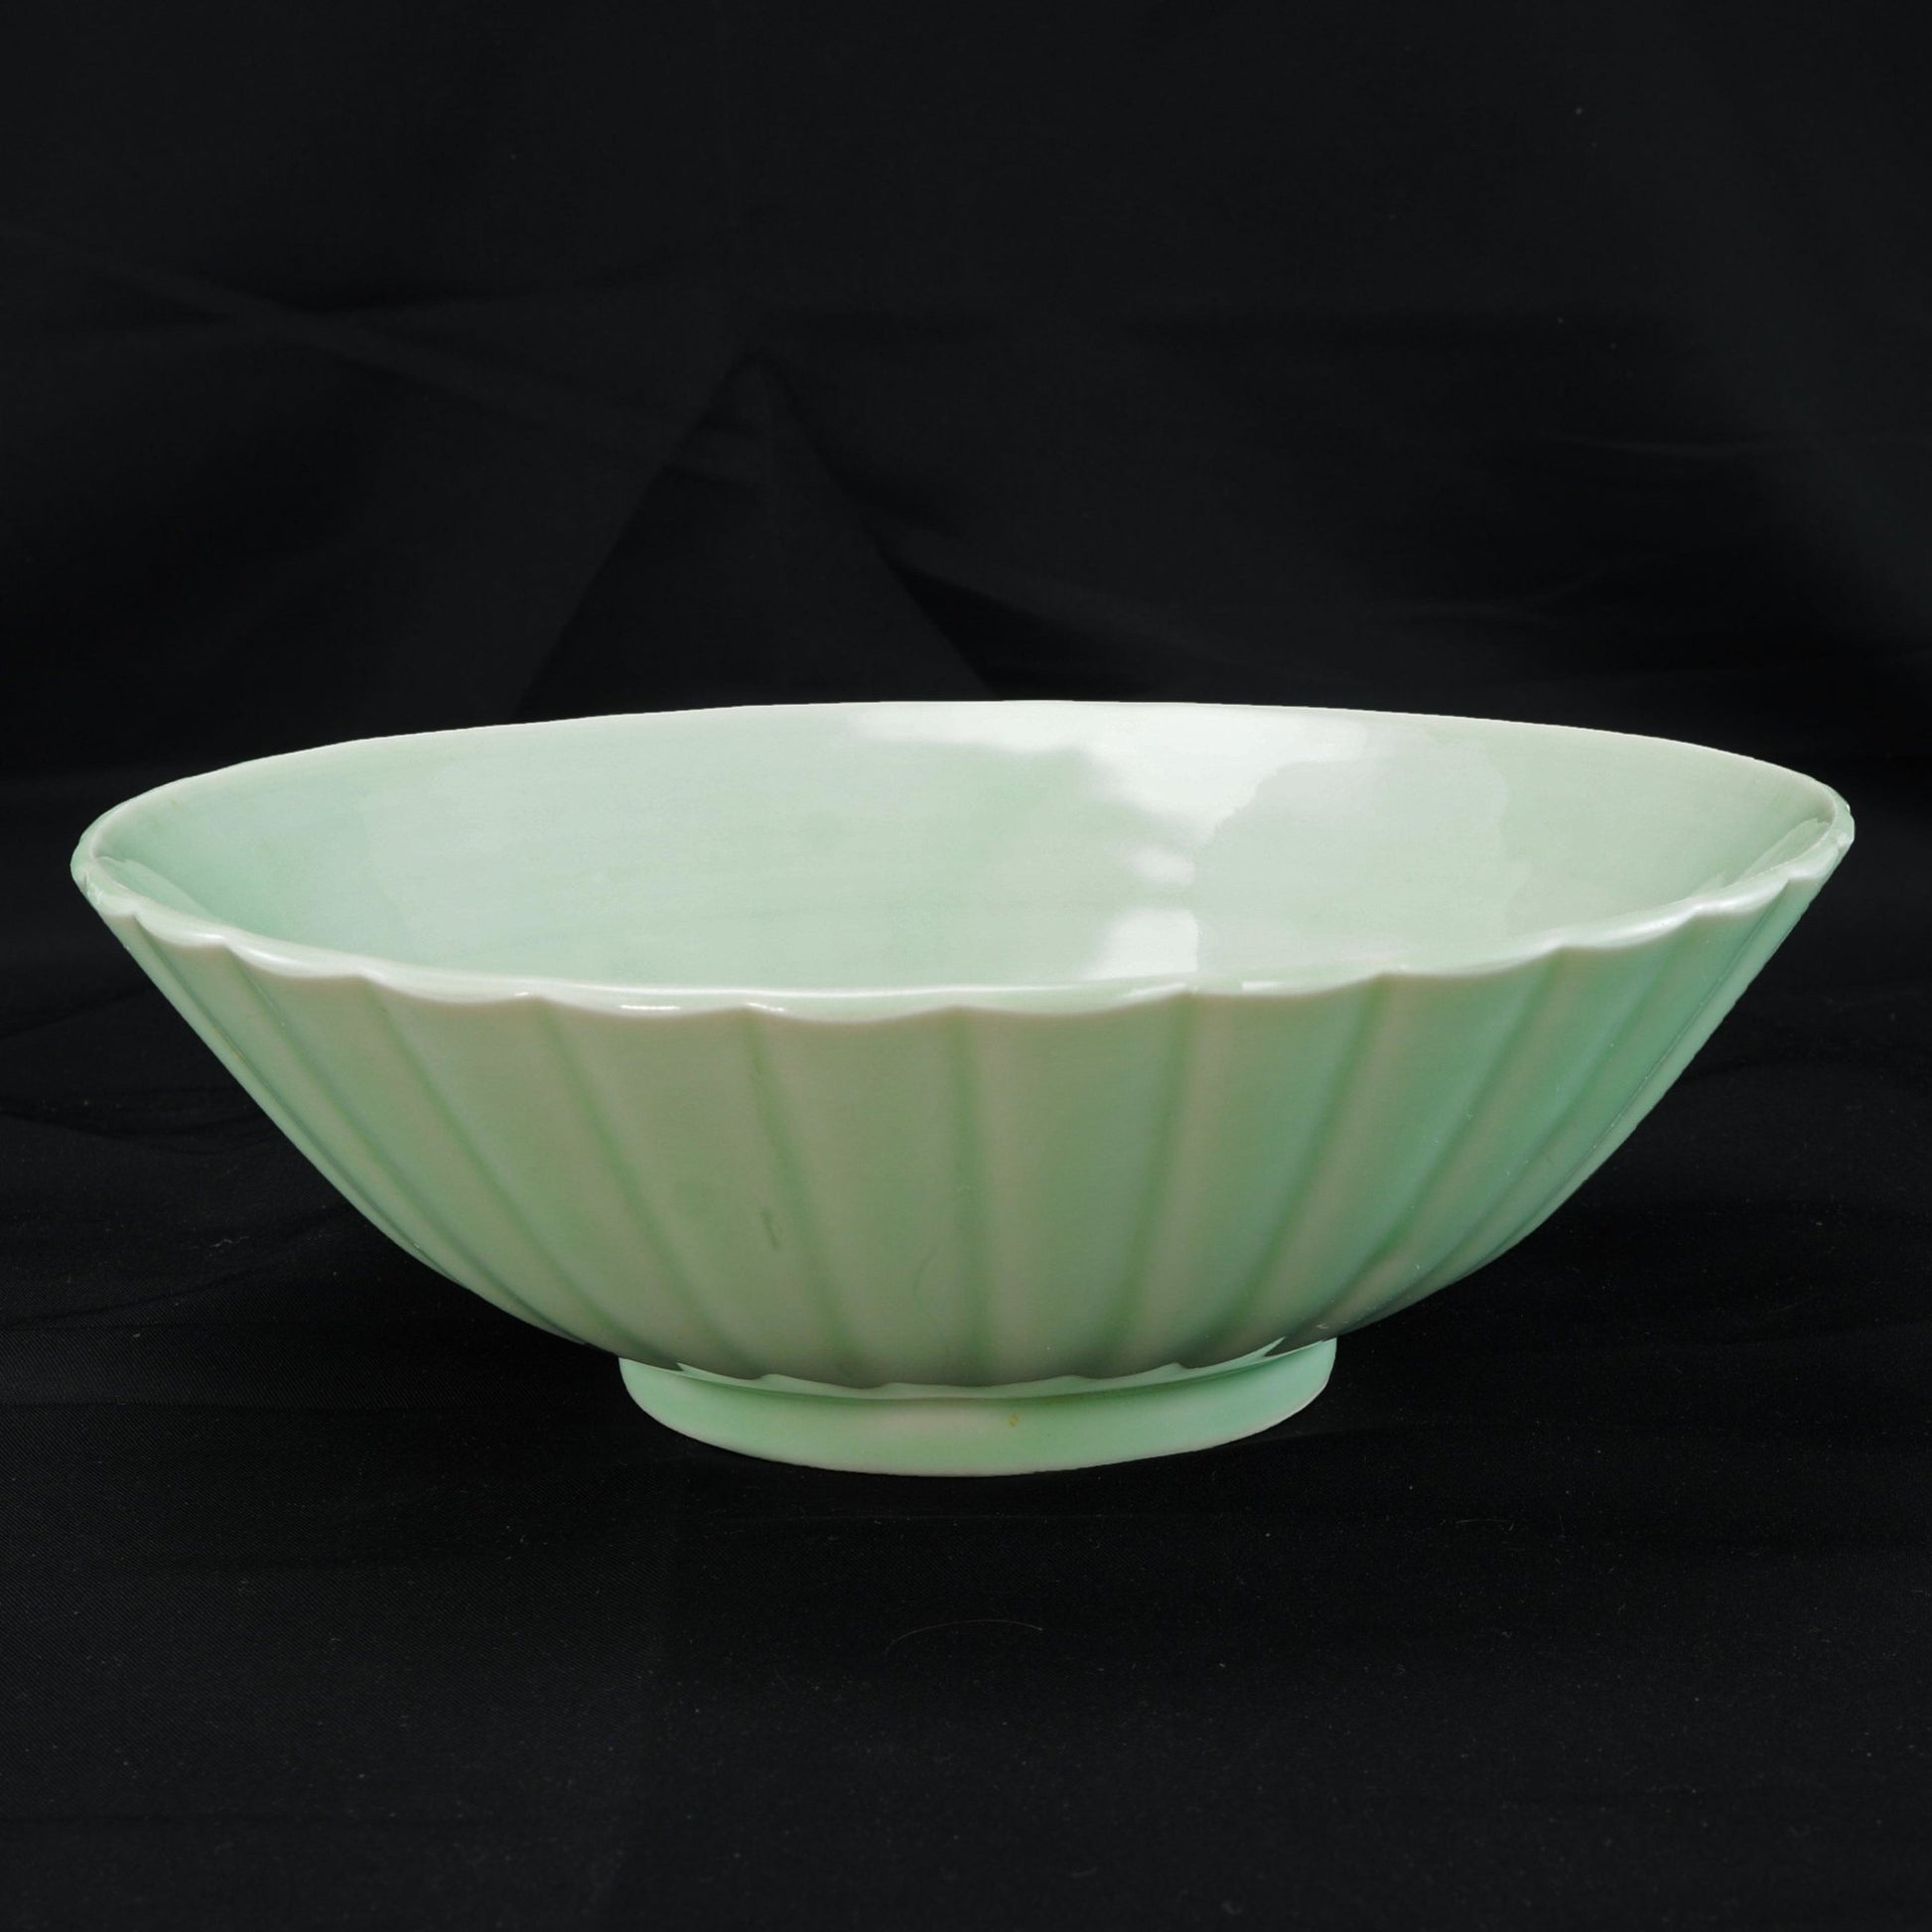 Chinese or Korean Monochrome Celadon Fluted Bowl Circa 1900 - Bear and Raven Antiques